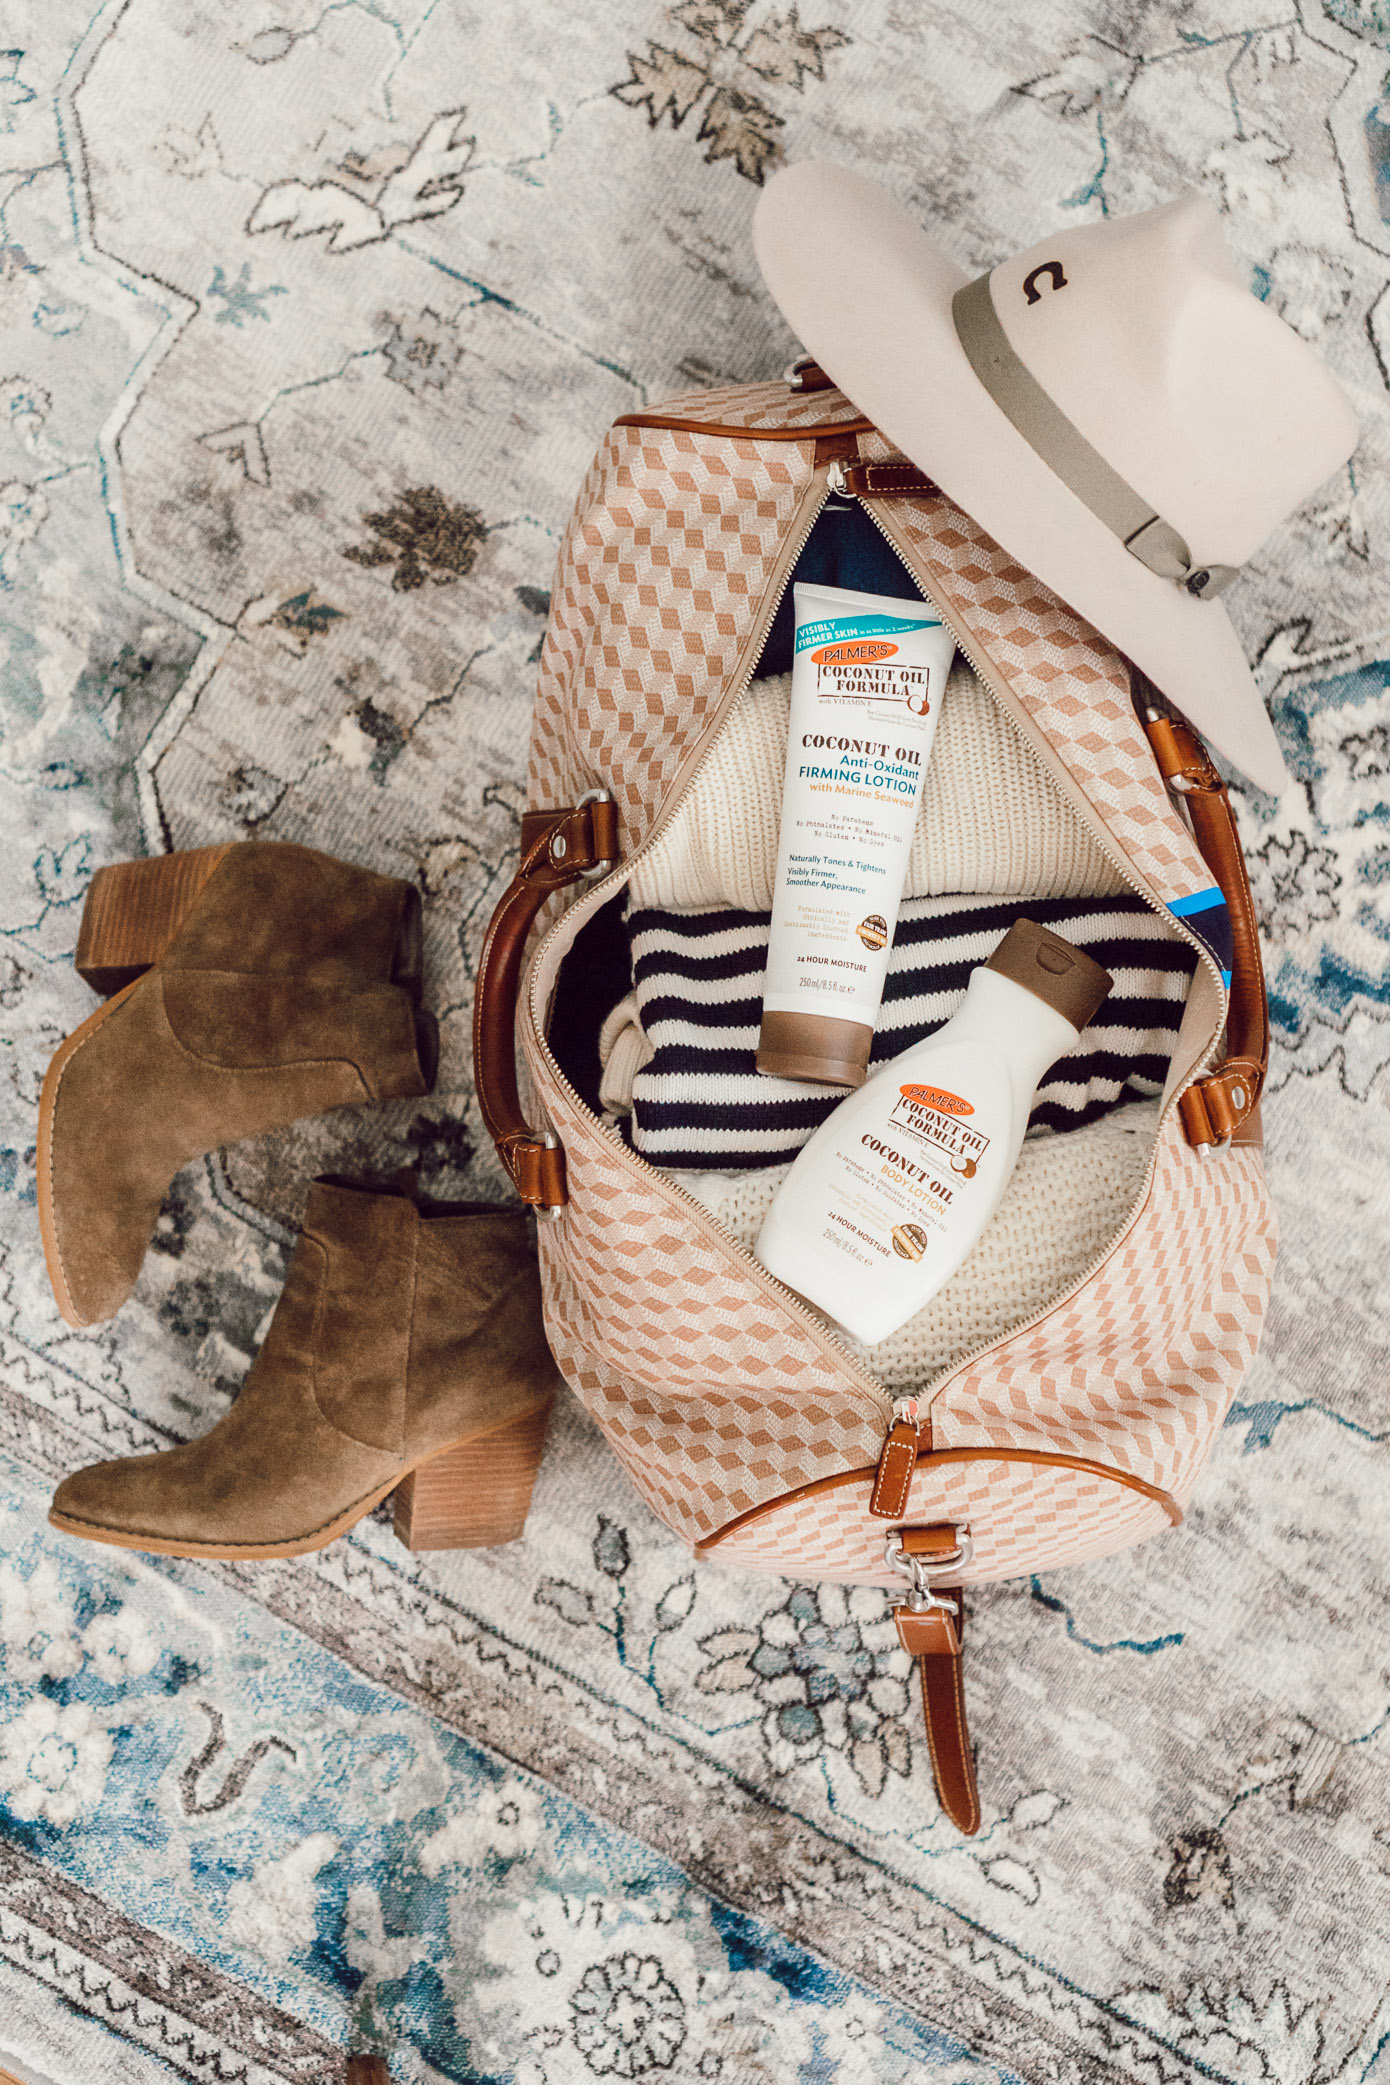 Palmer's Coconut Oil Skincare Products | Five Ways to Hydrate Your Skin While Traveling featured on Louella Reese